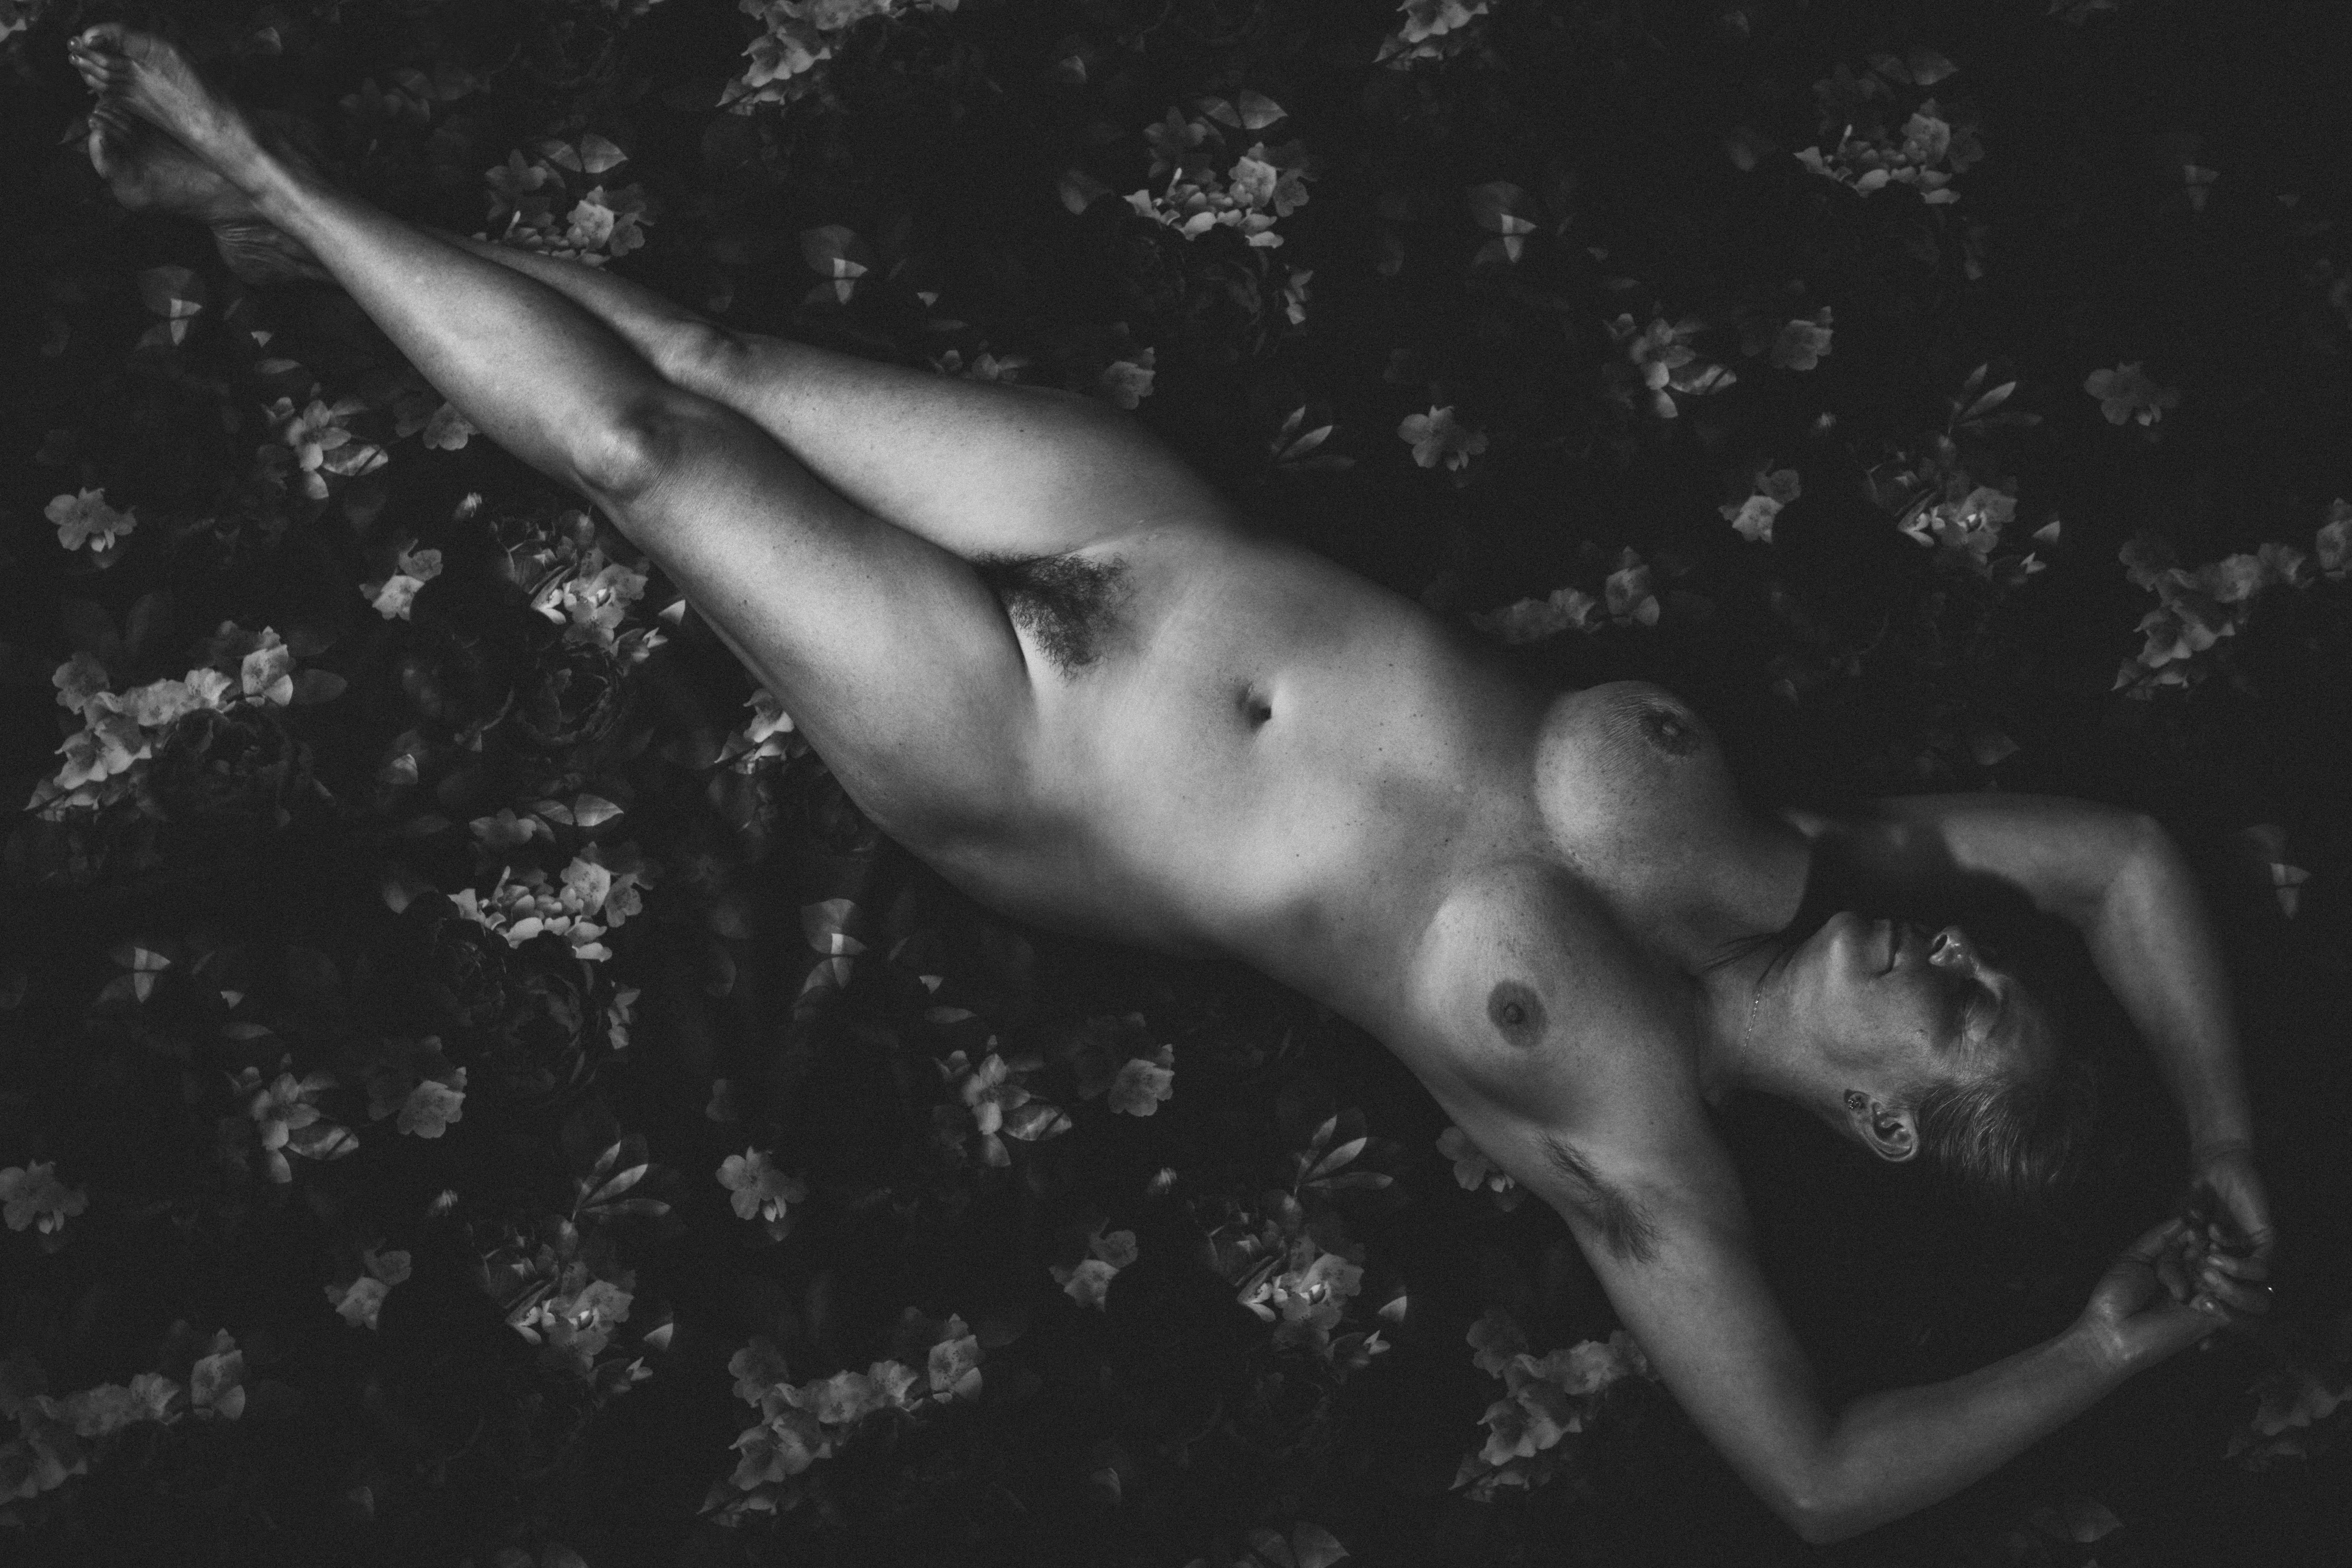 “Portrait of Nude Woman” Fine Art Nude Photography Limited Edition Print 2/3